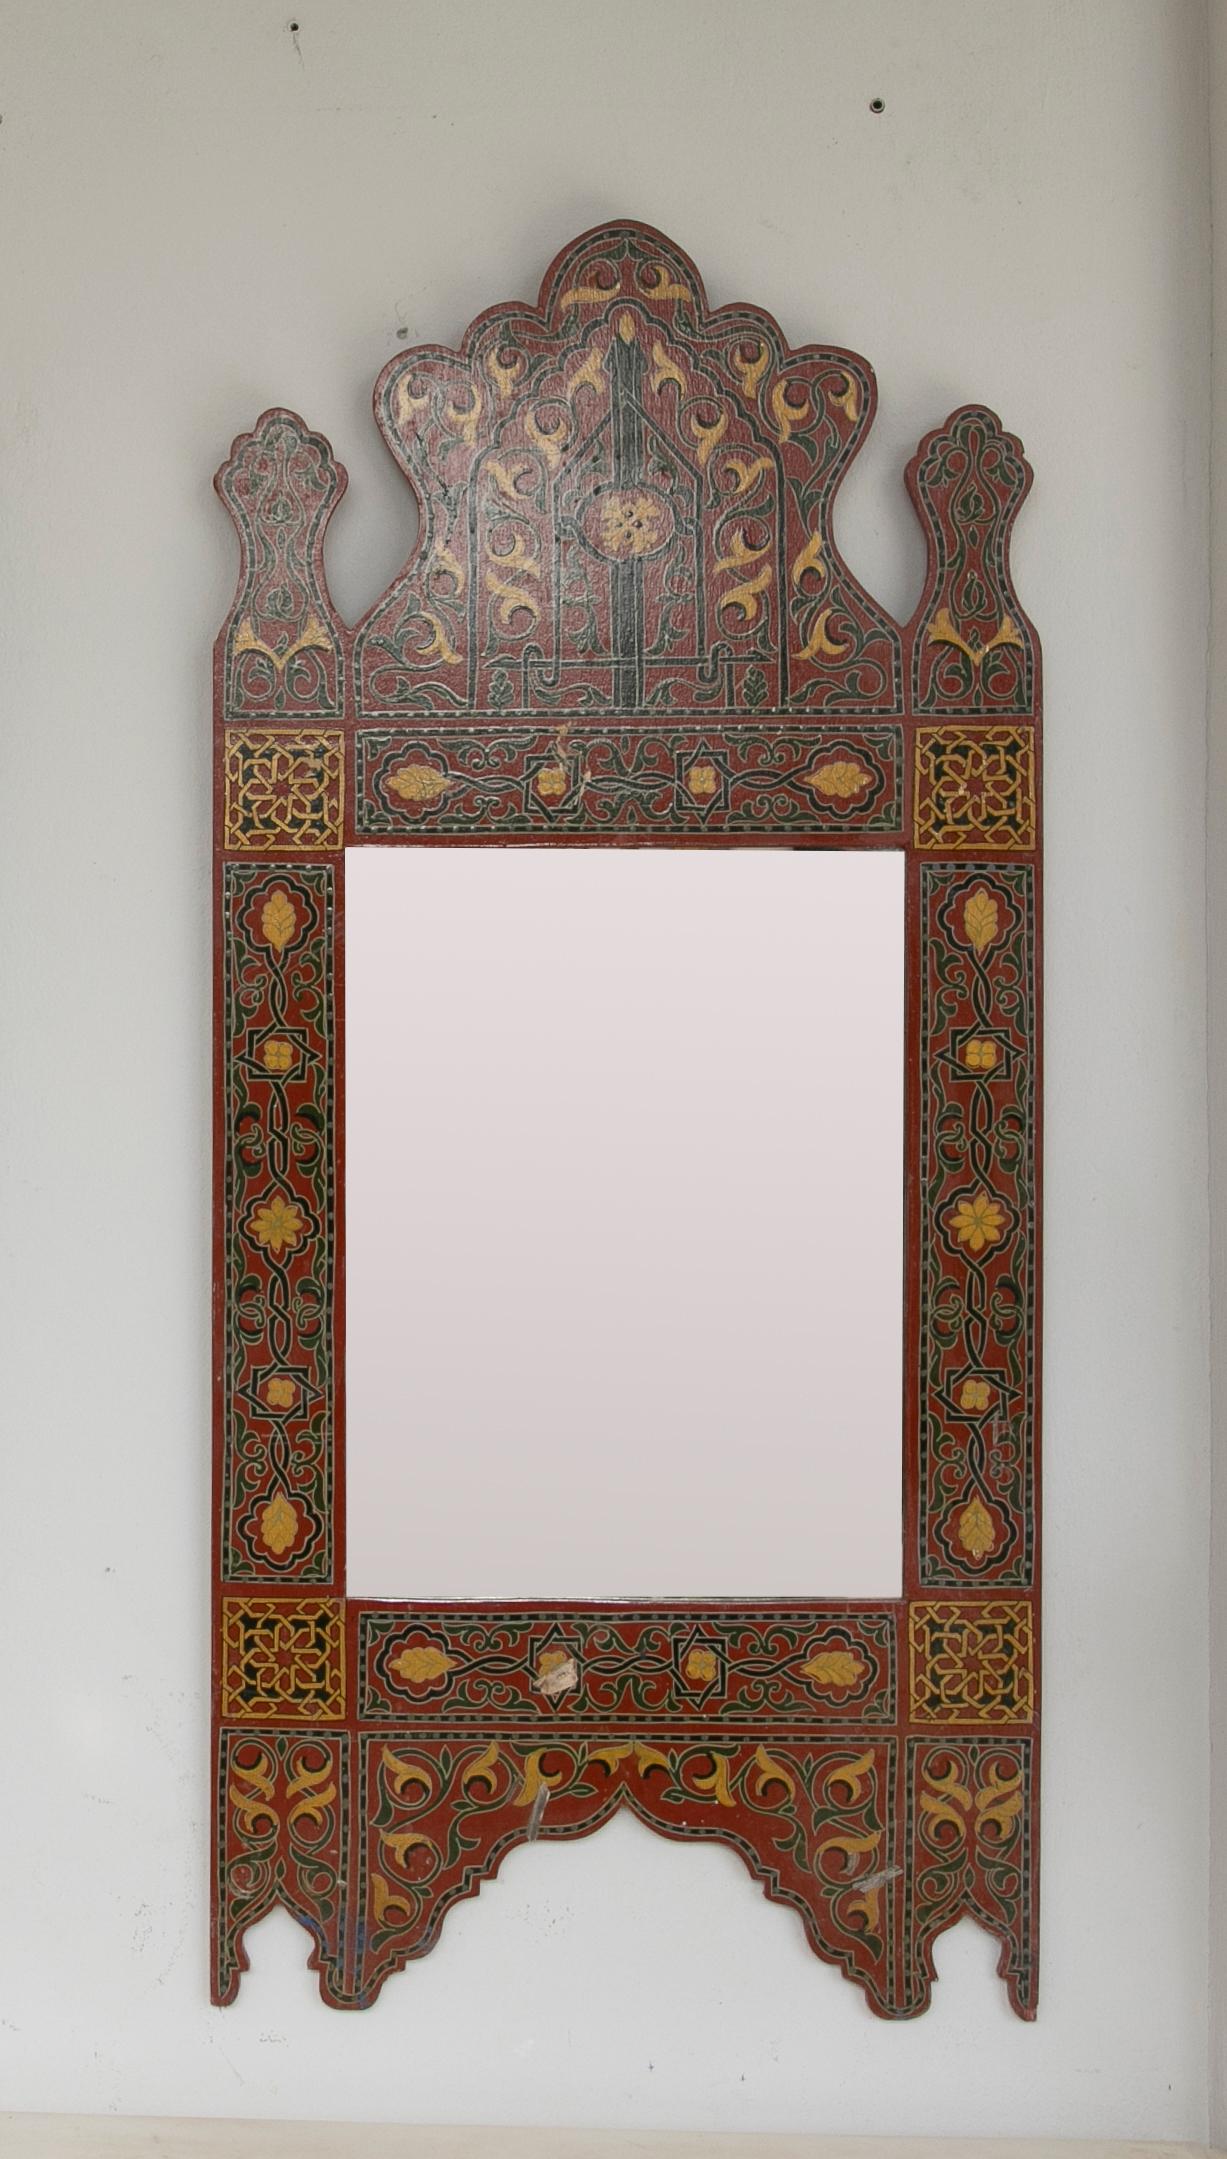 1990s Hand painted Moroccan style wooden mirror with Arabic decorations.